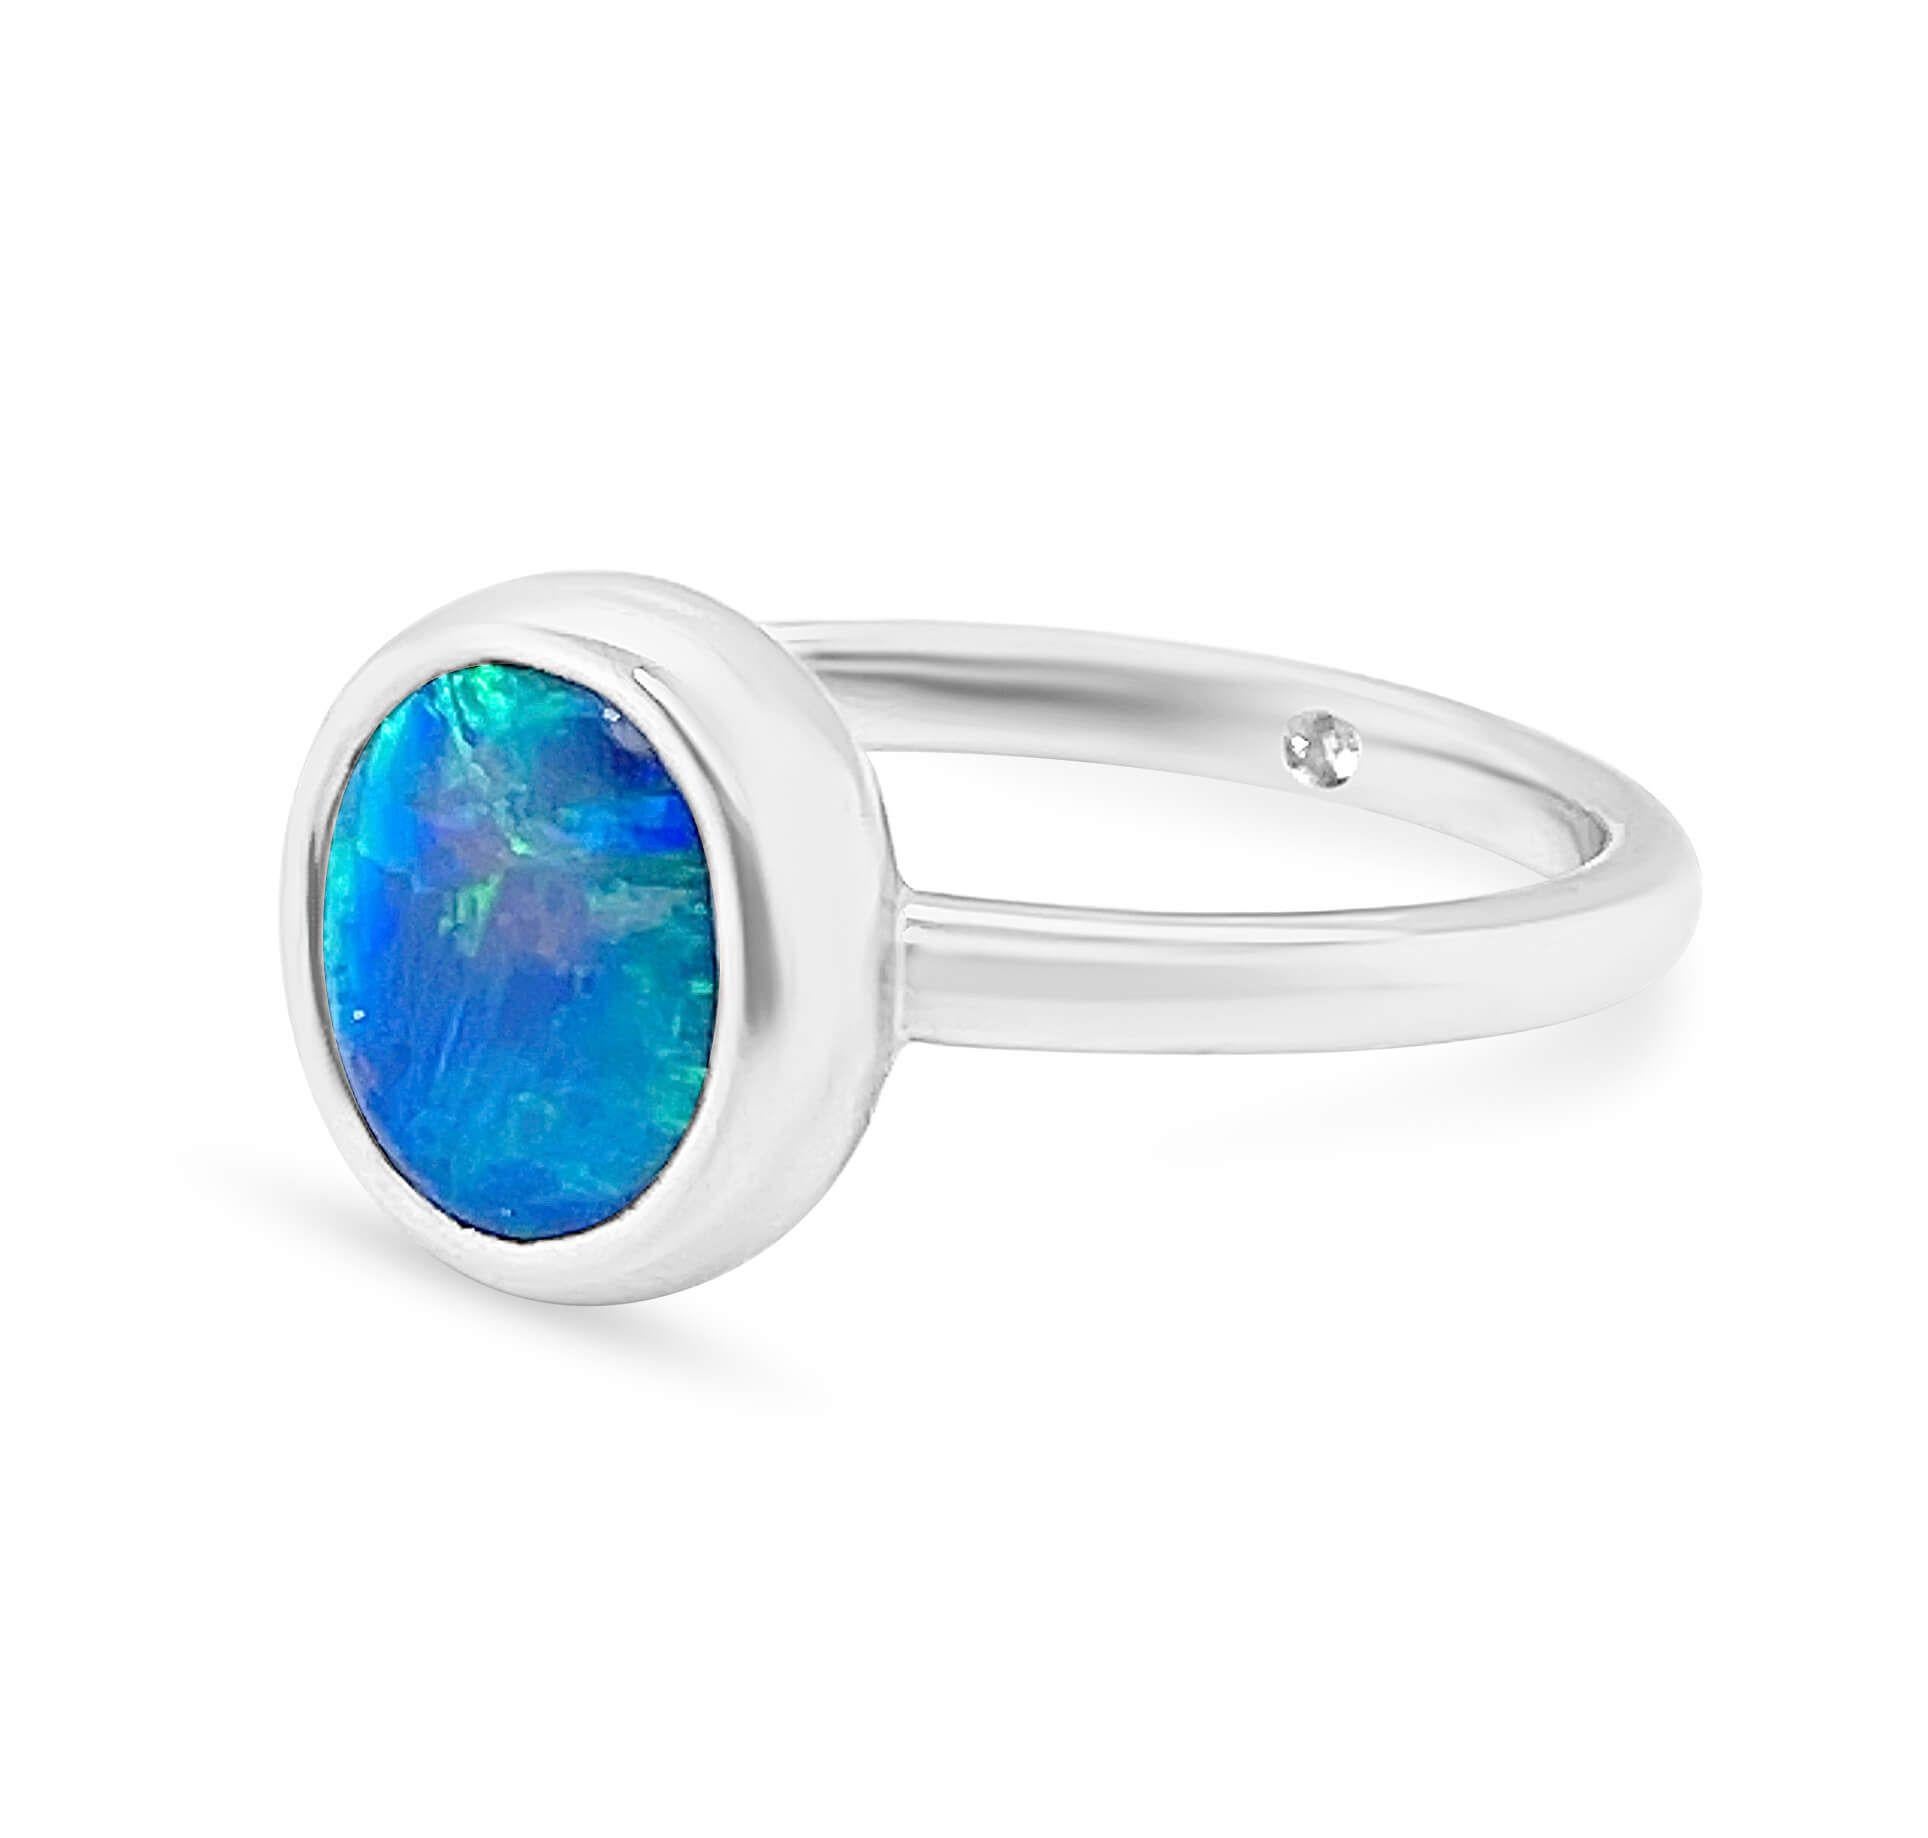 Cabochon Natural Untreated Australian 2.33ct Black Opal Ring in 18K White Gold